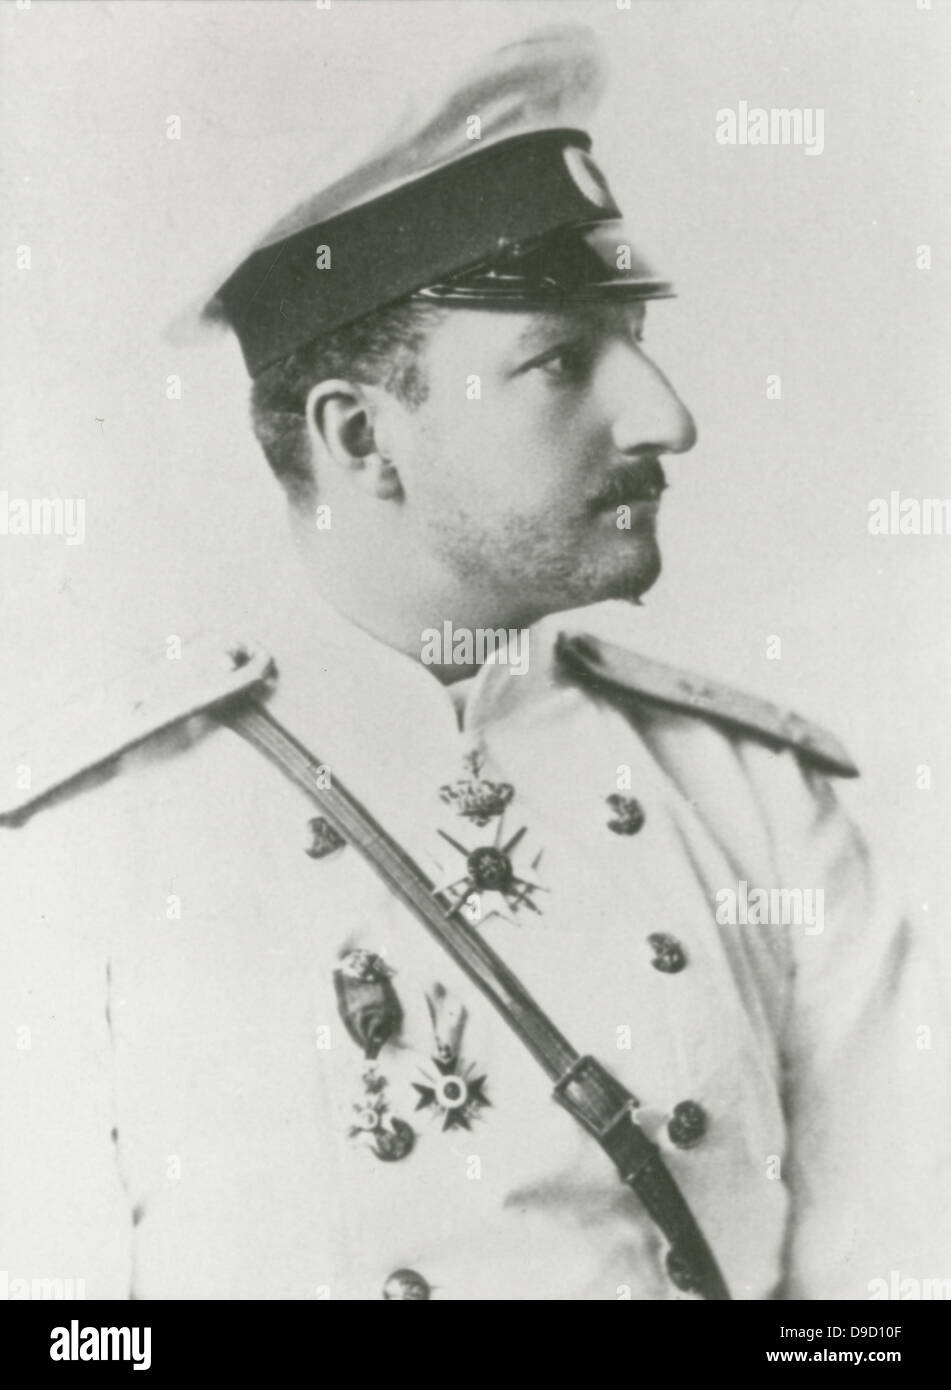 Ferdinand I of Bulgaria (1861-1948) Prince Regnant of Bulgaria 1887-1918, Tsar of Bulgaria 1908-1918.  In private life he was a botonist, entomologist and philatelist. Stock Photo